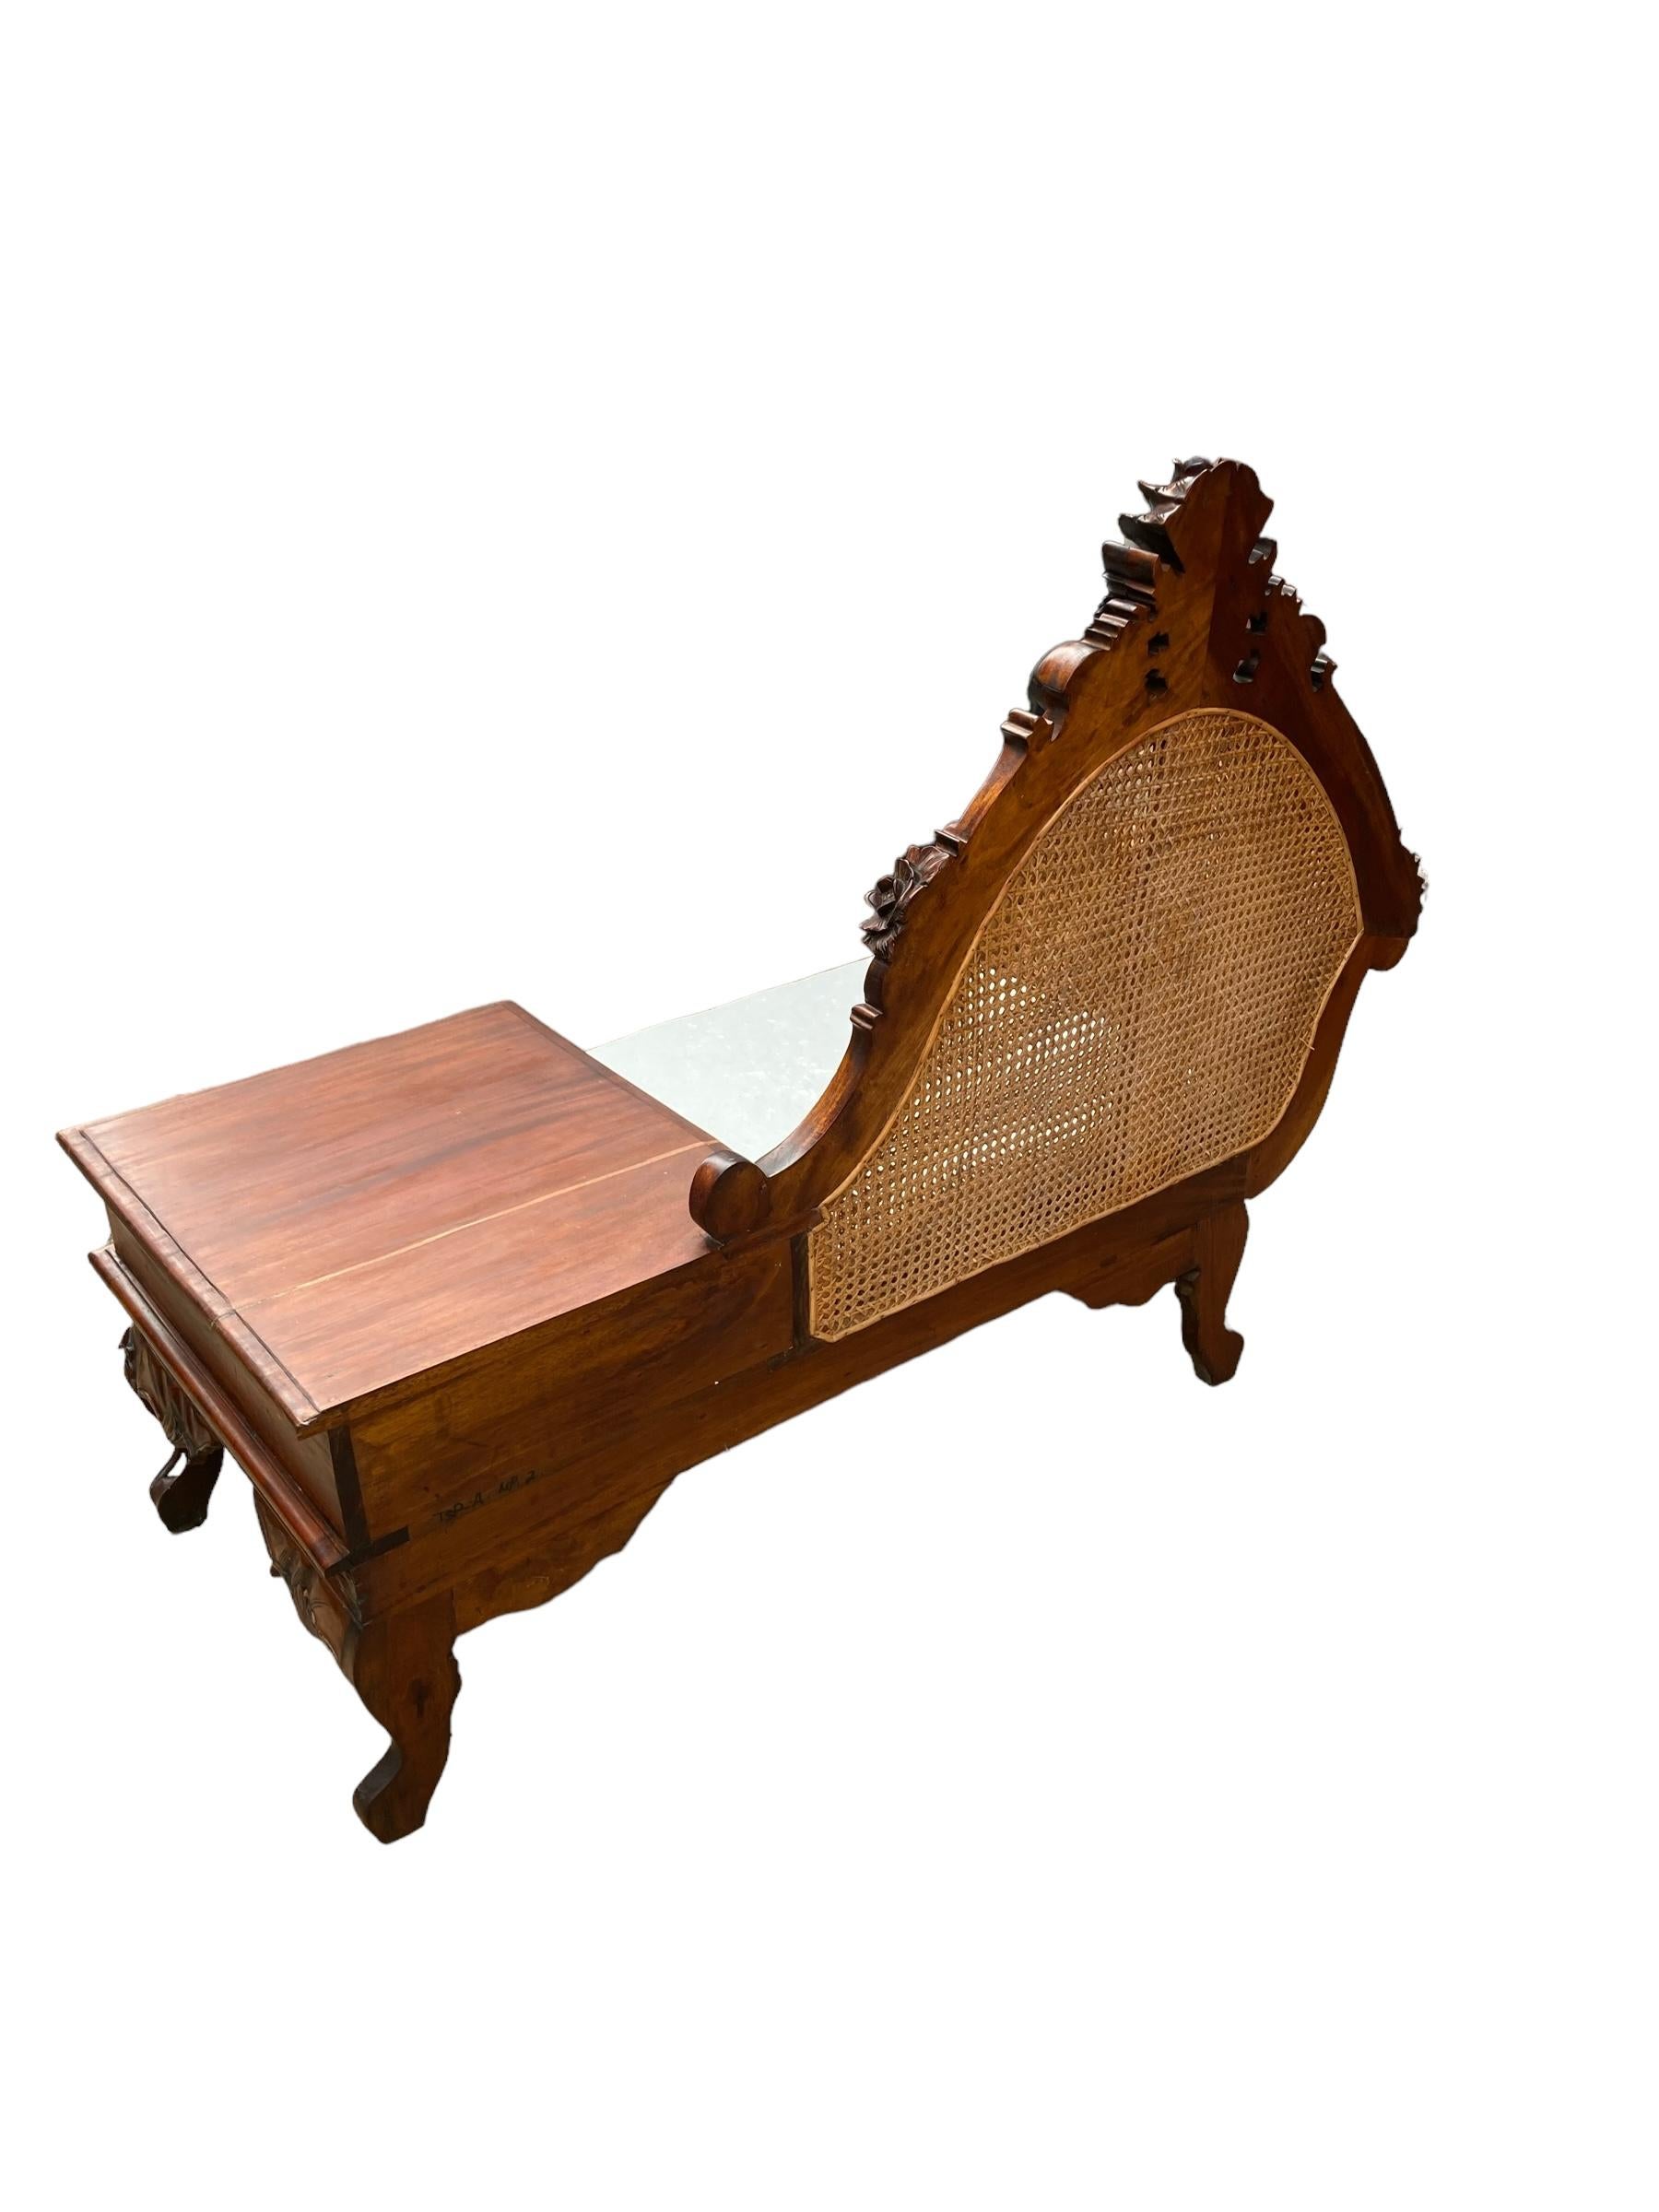 19th Century Original Hand Carved Mahogany Victorian Telephone or Gossip Bench, Bergere  For Sale